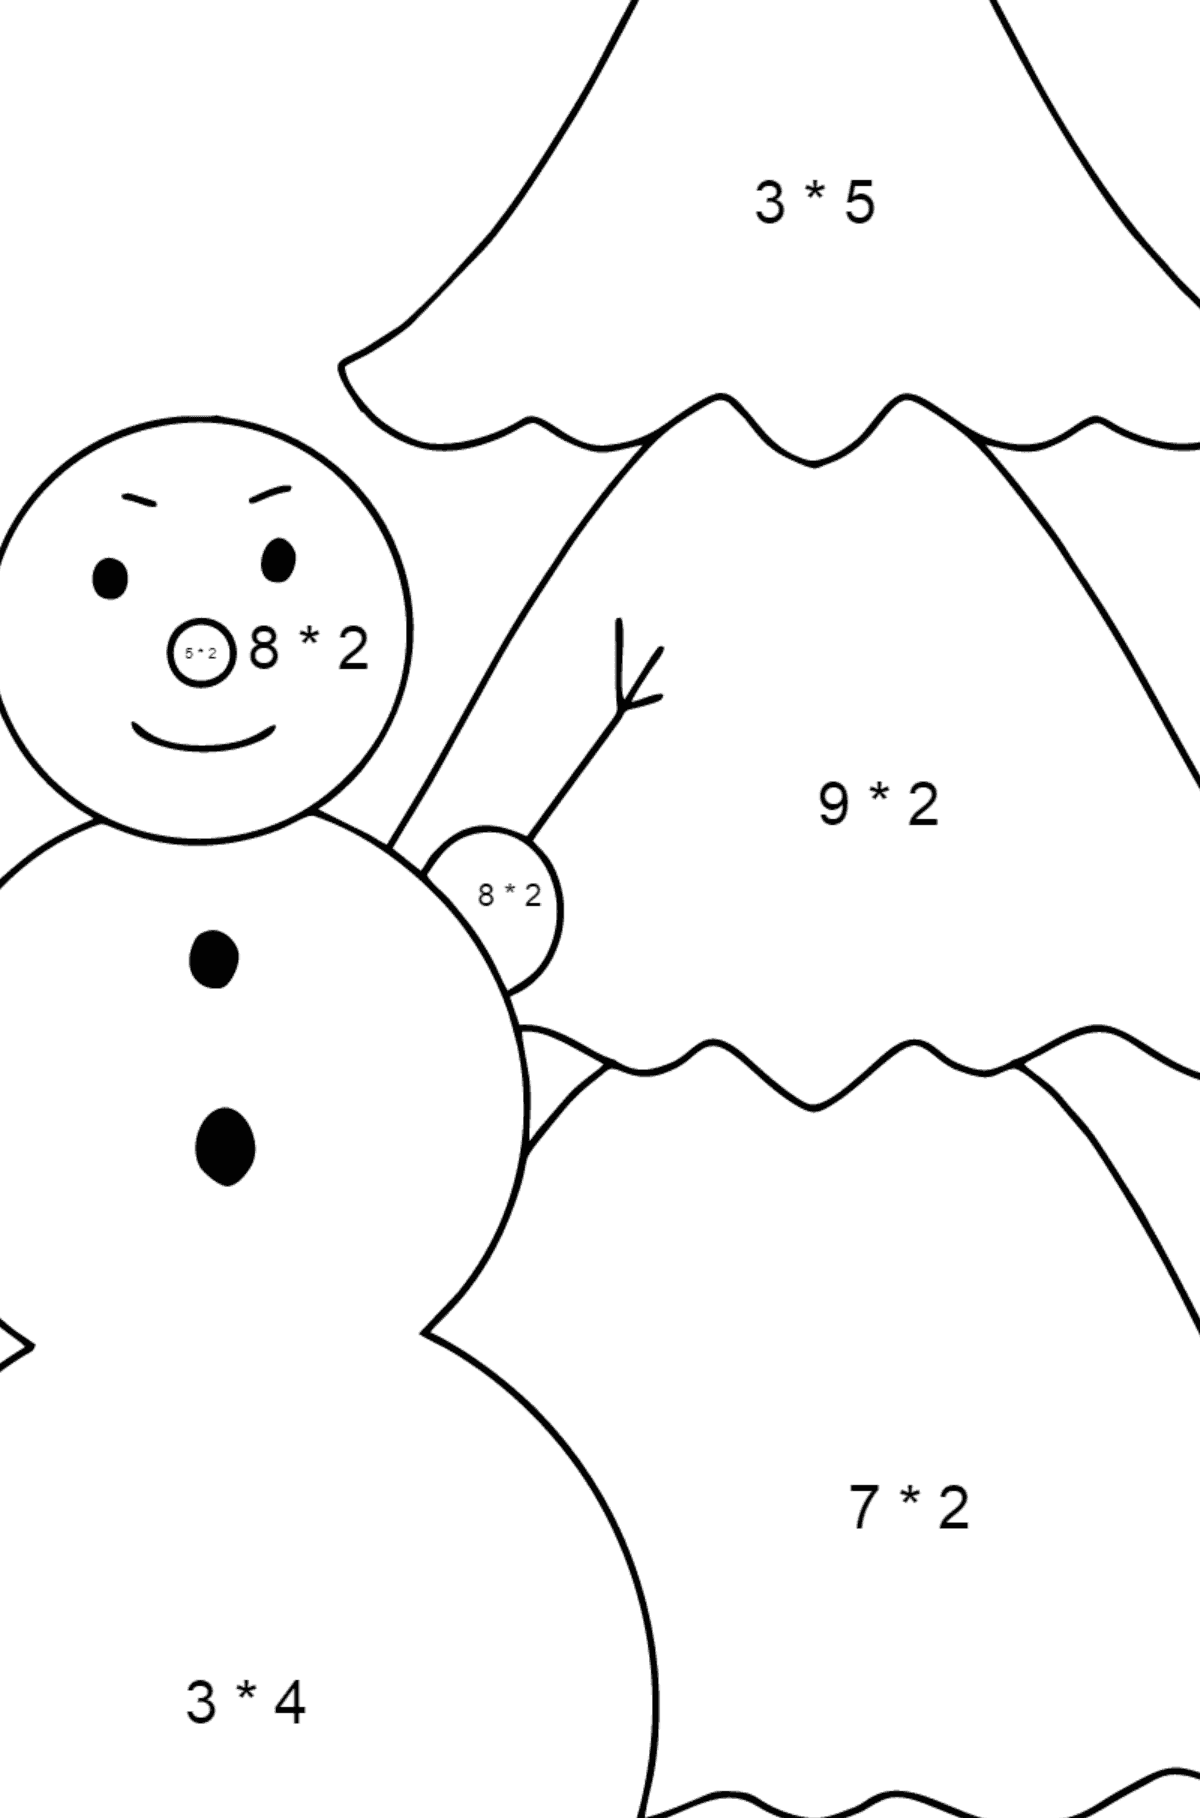 Snowman coloring page for kids - Math Coloring - Multiplication for Kids